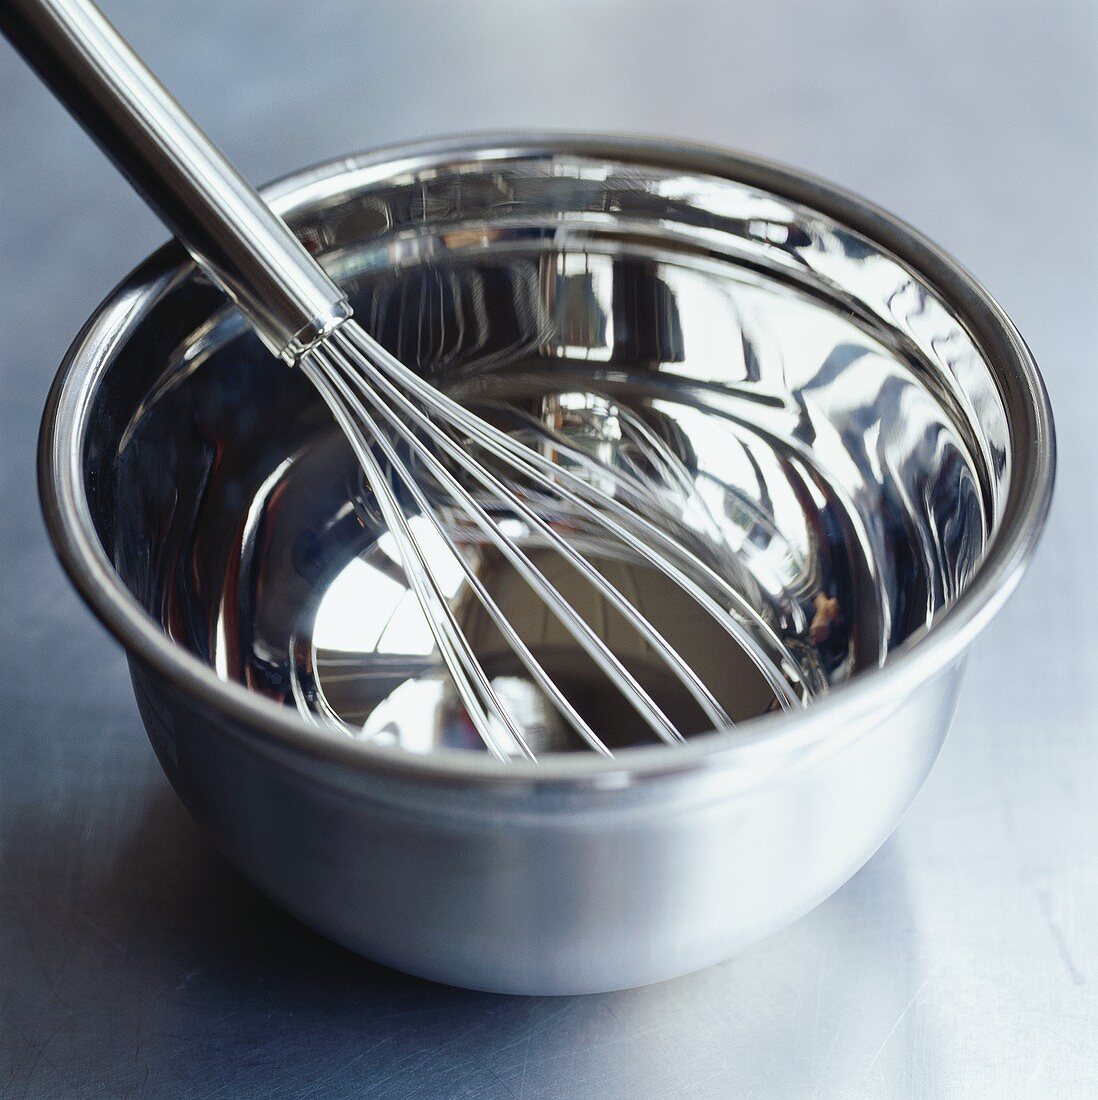 Whisk in stainless steel bowl